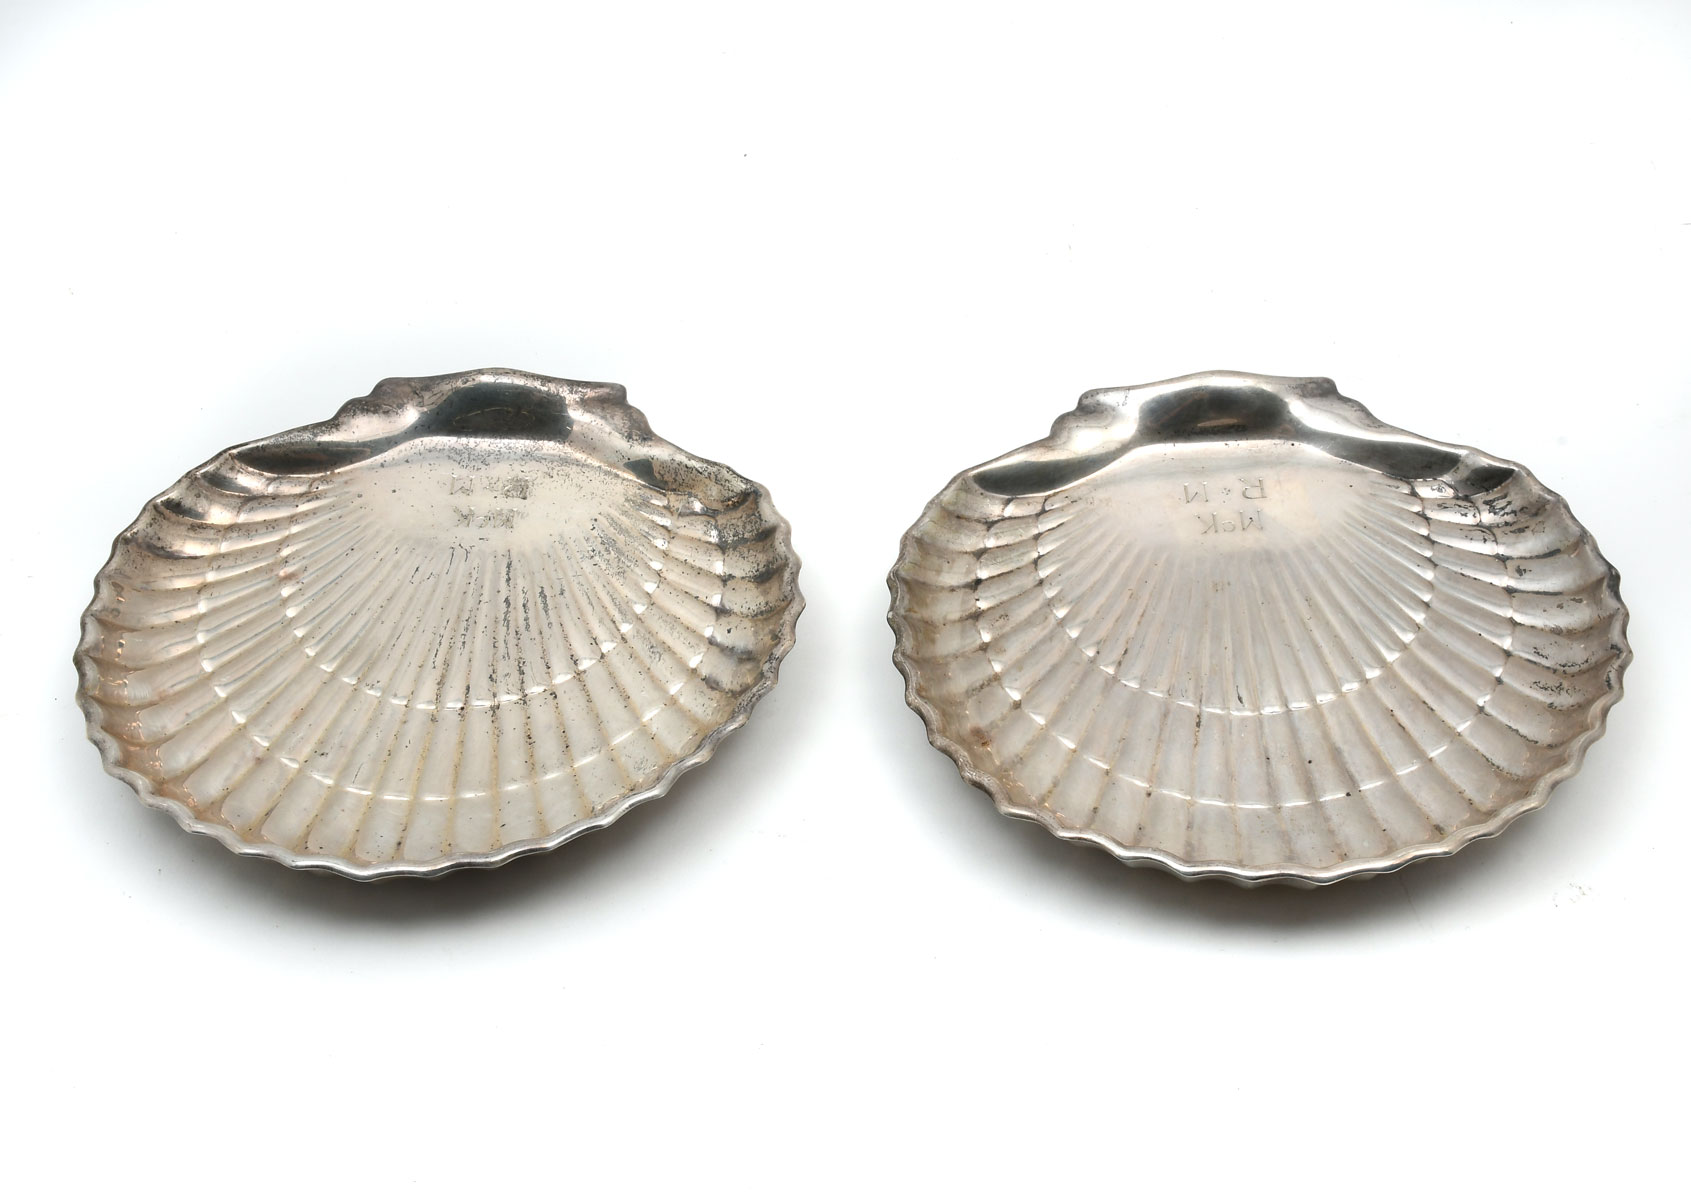 2 GORHAM STERLING SHELL FORM TRAYS  274d4f